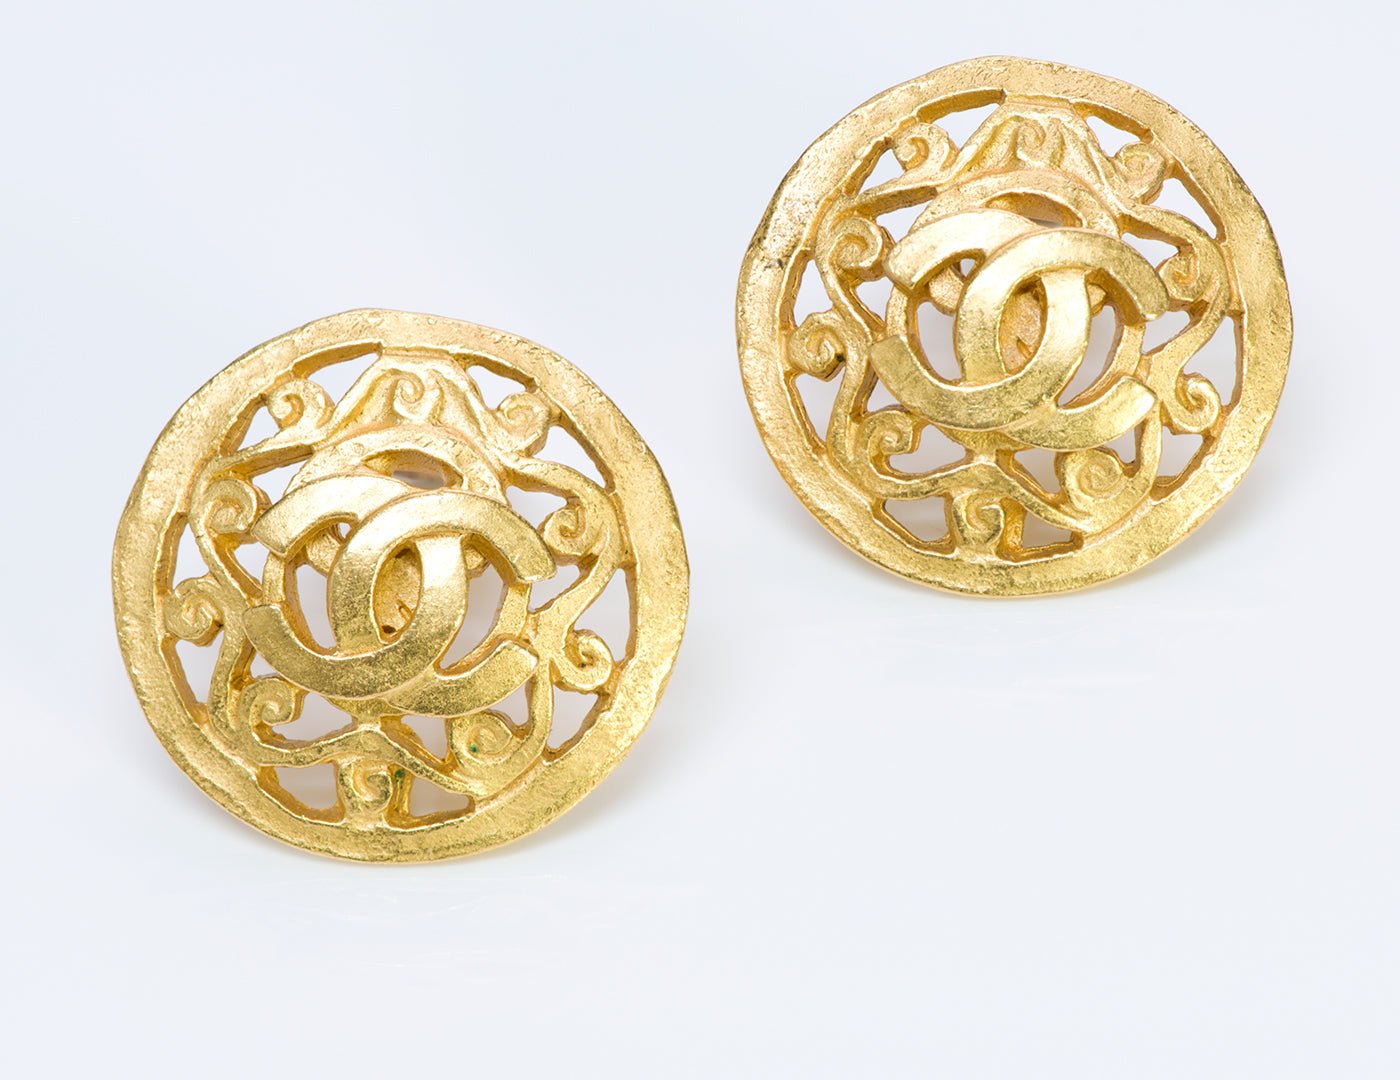 Chanel CC 1995 Gold Plated Round Earrings